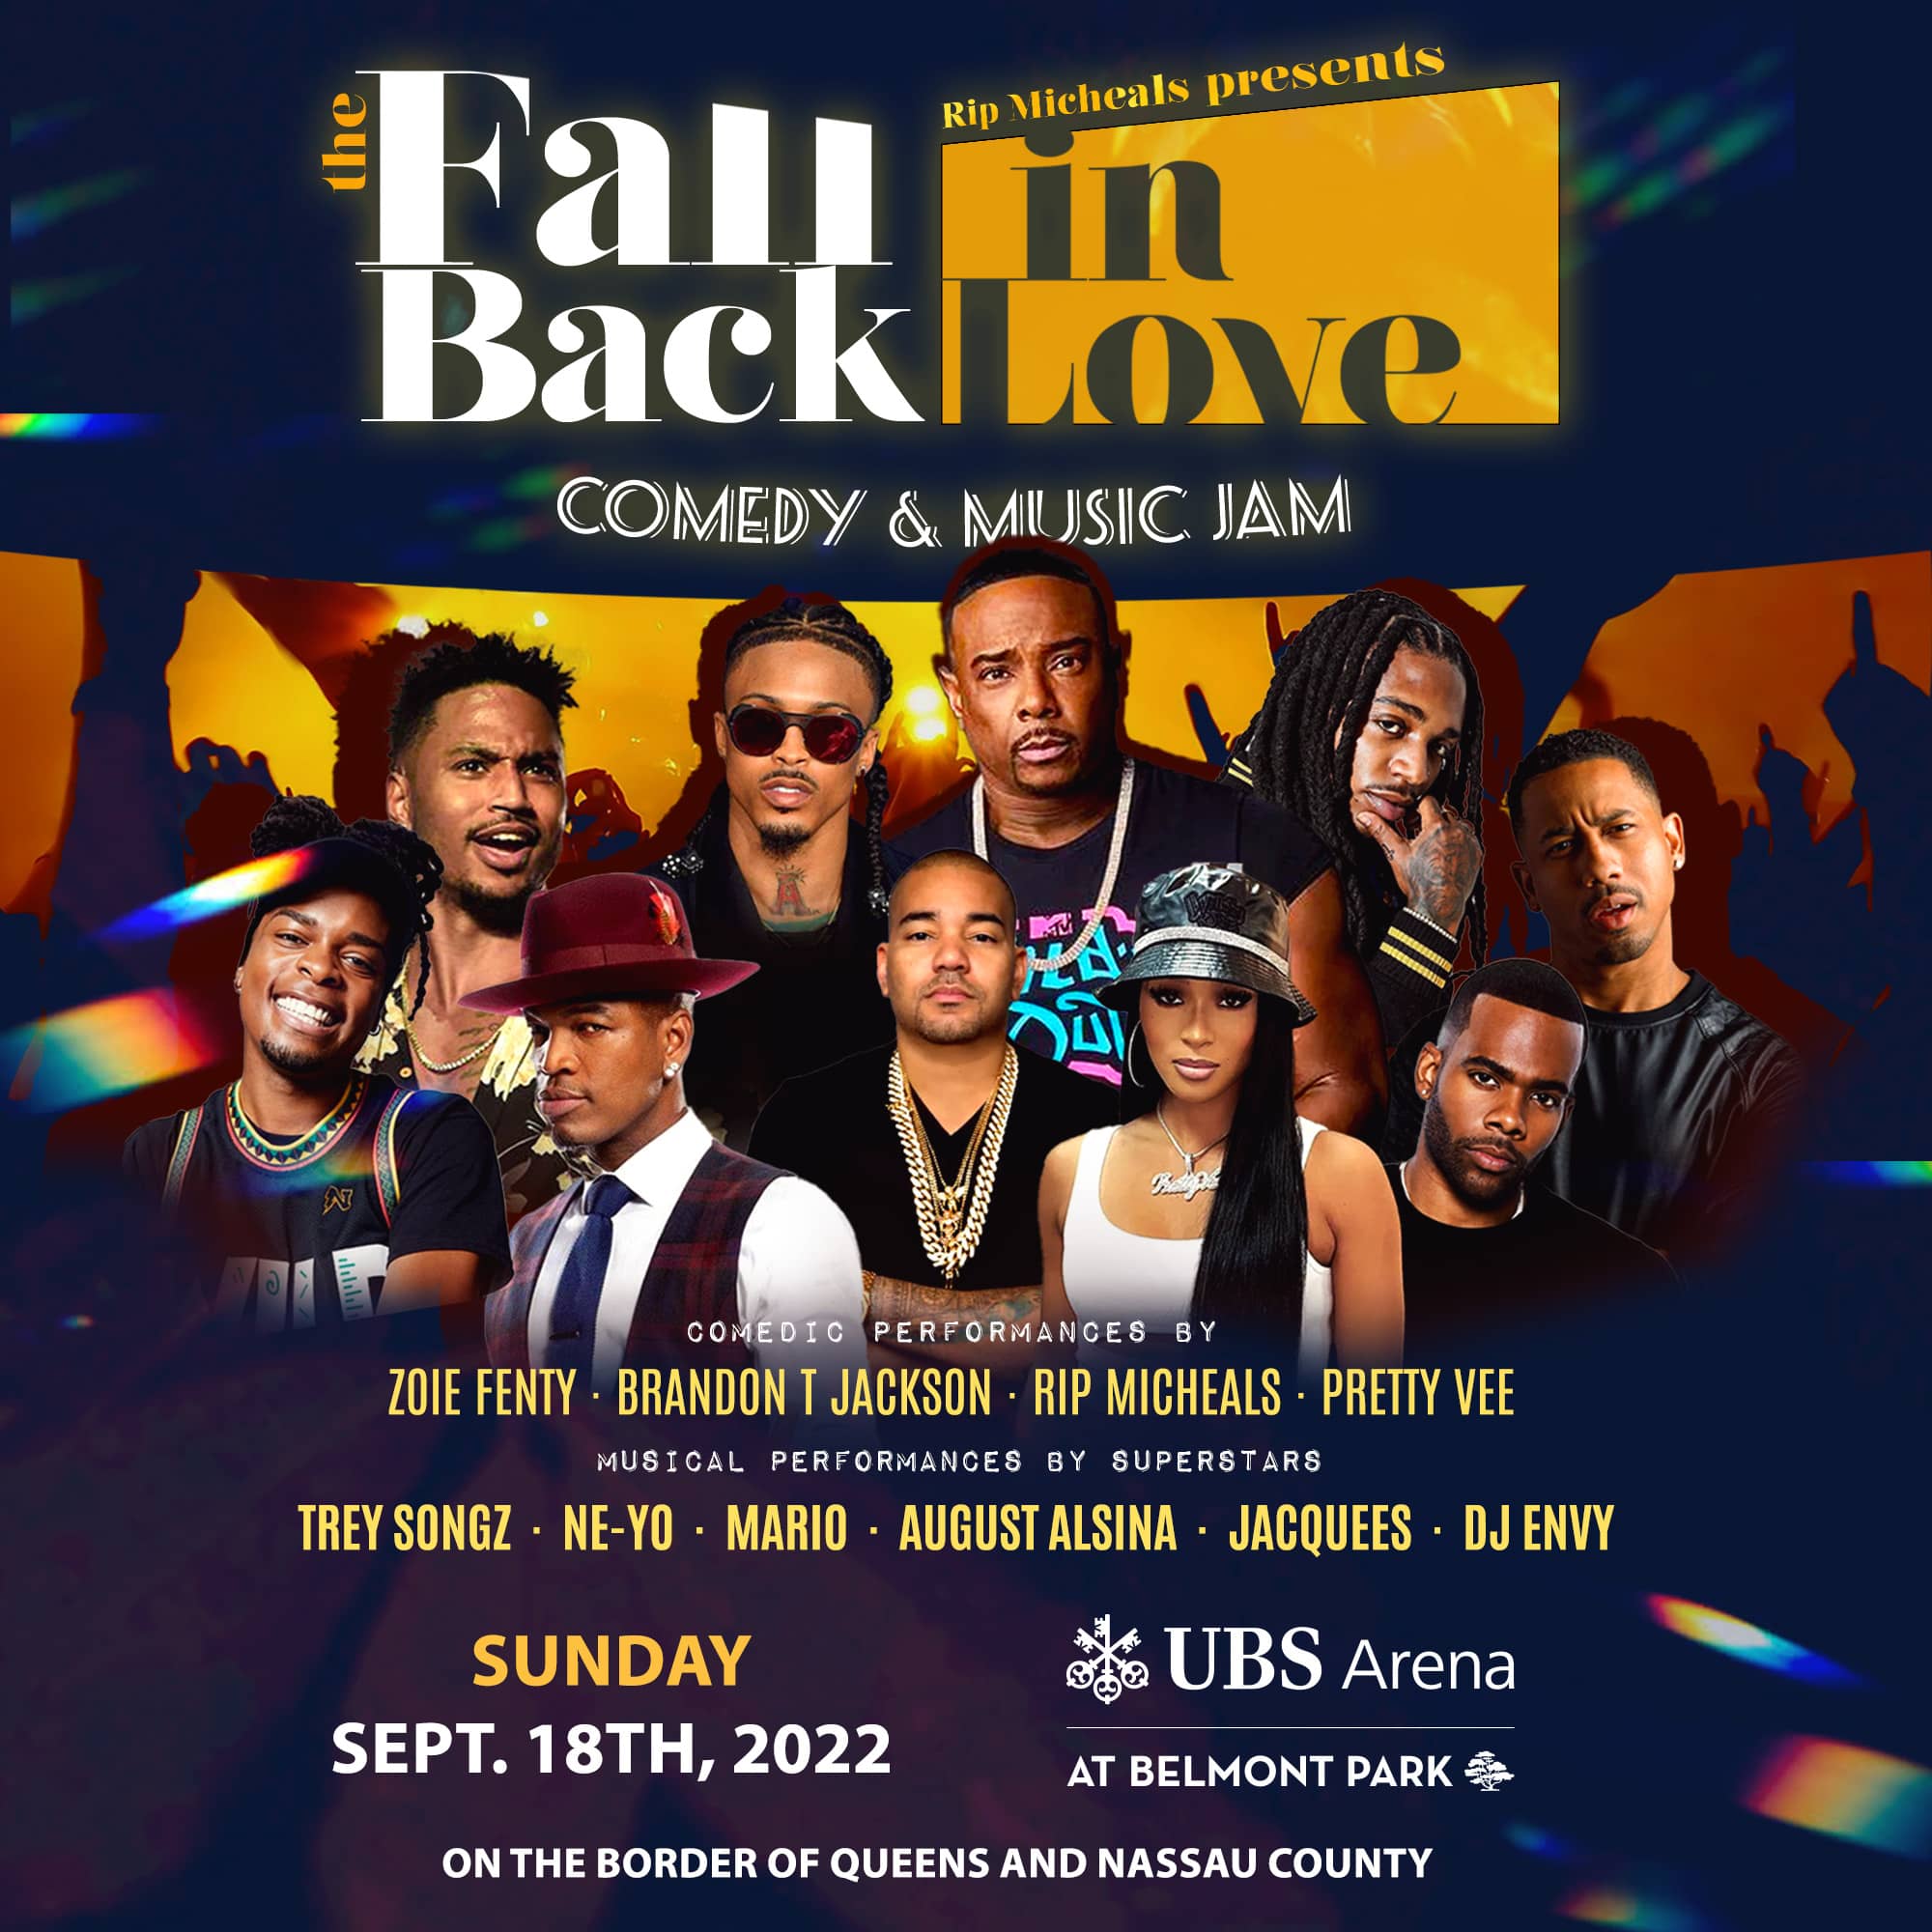 Rip Michaels presents the Fall Back in Love Comedy and Music Jam, on Sunday September 18th at the UBS Arena in Long Island!